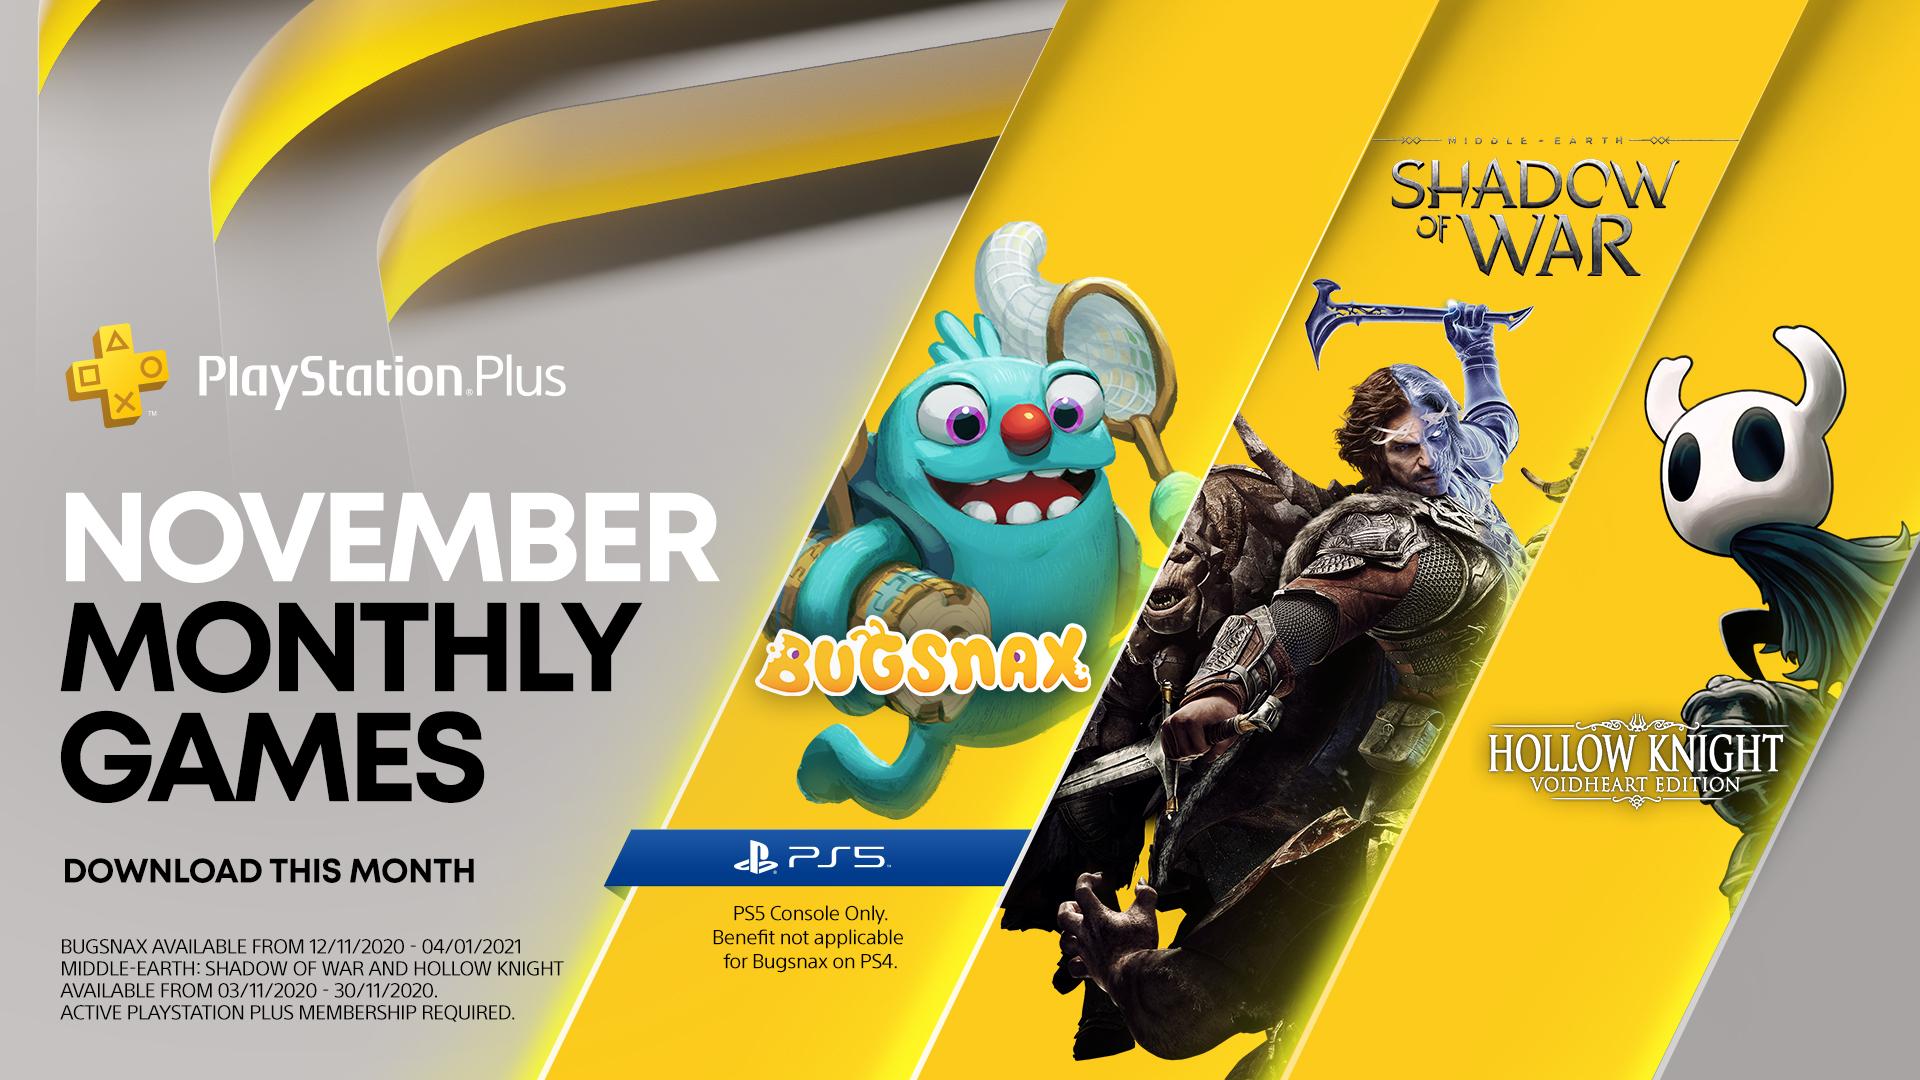 PlayStation Europe on Twitter: "Middle-earth: of War Hollow Knight: Voidheart Edition Bugsnax 🍓 on #PS5 PS Plus games for November have been https://t.co/zBaolvYKPy" / Twitter